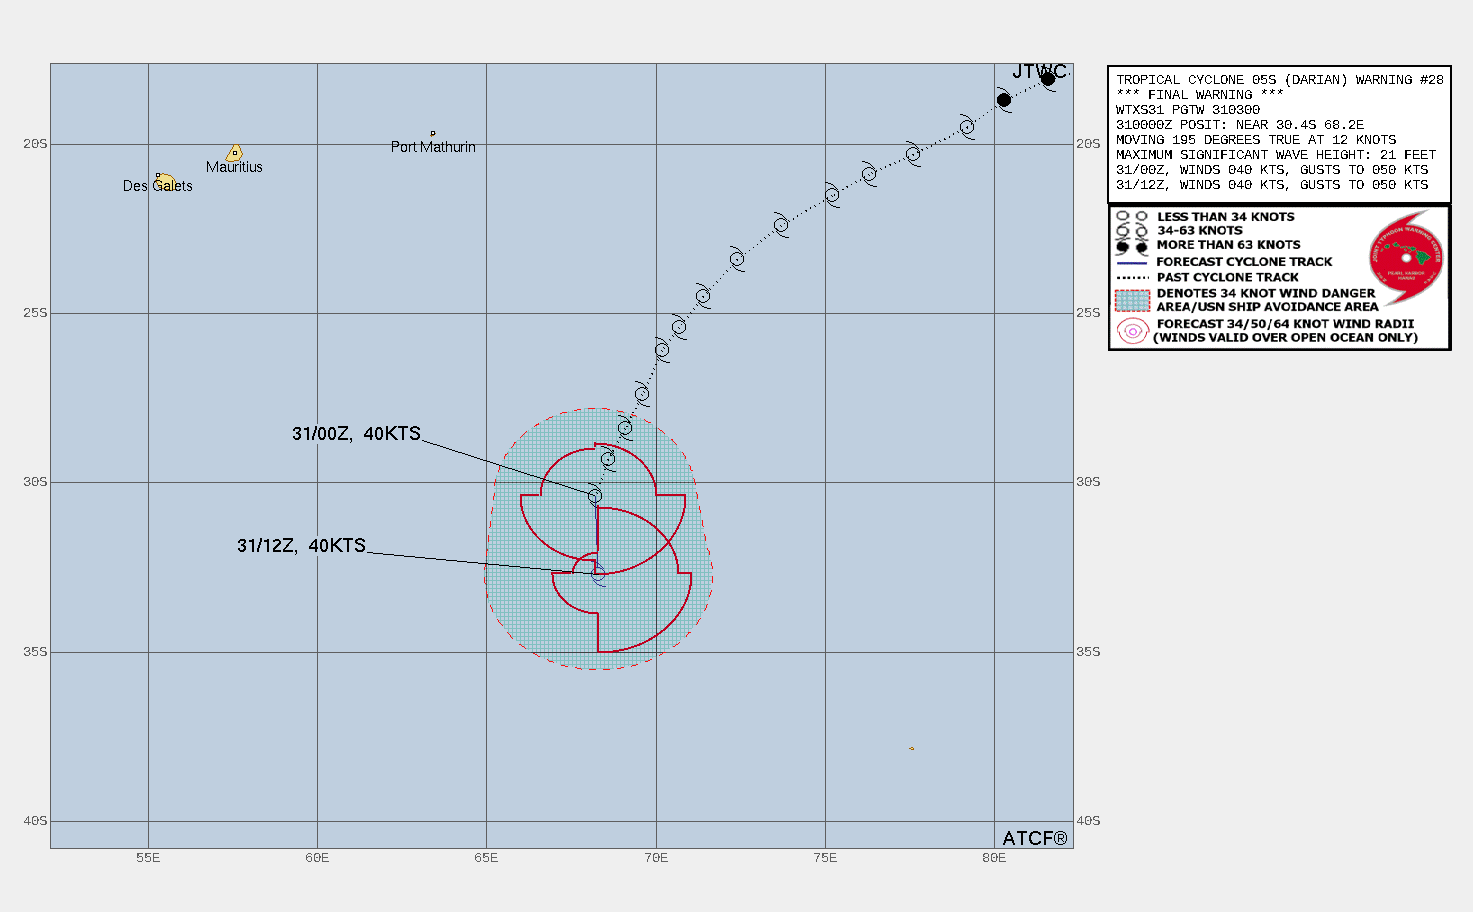 REMARKS: 310300Z POSITION NEAR 31.0S 68.2E. 31DEC22. TROPICAL CYCLONE (TC) 05S (DARIAN), LOCATED APPROXIMATELY 854  NM SOUTHEAST OF PORT LOUIS, MAURITIUS, HAS TRACKED SOUTH-SOUTHWESTWARD  AT 12 KNOTS OVER THE PAST SIX HOURS. ANIMATED MULTISPECTRAL SATELLITE  IMAGERY DEPICTS AN EXPOSED, BROAD LOW-LEVEL CIRCULATION WITH COLD-AIR  STRATOCUMULUS WRAPPING INTO THE CENTER AND ISOLATED DEEP CONVECTION  FLARING TO THE SOUTH-SOUTHEAST. A 310038Z SSMIS 91GHZ MICROWAVE IMAGE  INDICATES SHALLOW BANDING WRAPPING TIGHTLY INTO A RAGGED CENTER WITH  EXTENSIVE DRY AIR PRESENT OVER THE SYSTEM. RECENT WIND SPEED IMAGERY  REVEALS AN ASYMMETRIC WIND FIELD WITH A WEAK FRONTAL STRUCTURE. A  301705Z ASCAT-B IMAGE SHOWED 40-45 KNOT WINDS OVER THE WESTERN  PERIPHERY THUS THE INITIAL INTENSITY IS HELD CONSERVATIVELY AT 40  KNOTS. BASED ON THE AVAILABLE DATA, 05S IS CURRENTLY ASSESSED AS A  SUBTROPICAL CYCLONE BUT IS EXPECTED TO TRANSITION INTO AN EXTRA- TROPICAL CYCLONE OVER THE NEXT 36 TO 48 HOURS AS IT ACCELERATES INTO  THE MIDLATITUDE WESTERLIES. THIS IS THE FINAL WARNING ON THIS SYSTEM  BY THE JOINT TYPHOON WRNCEN PEARL HARBOR HI. THE SYSTEM WILL BE  CLOSELY MONITORED FOR SIGNS OF REGENERATION. MAXIMUM SIGNIFICANT WAVE  HEIGHT AT 310000Z IS 21 FEET.